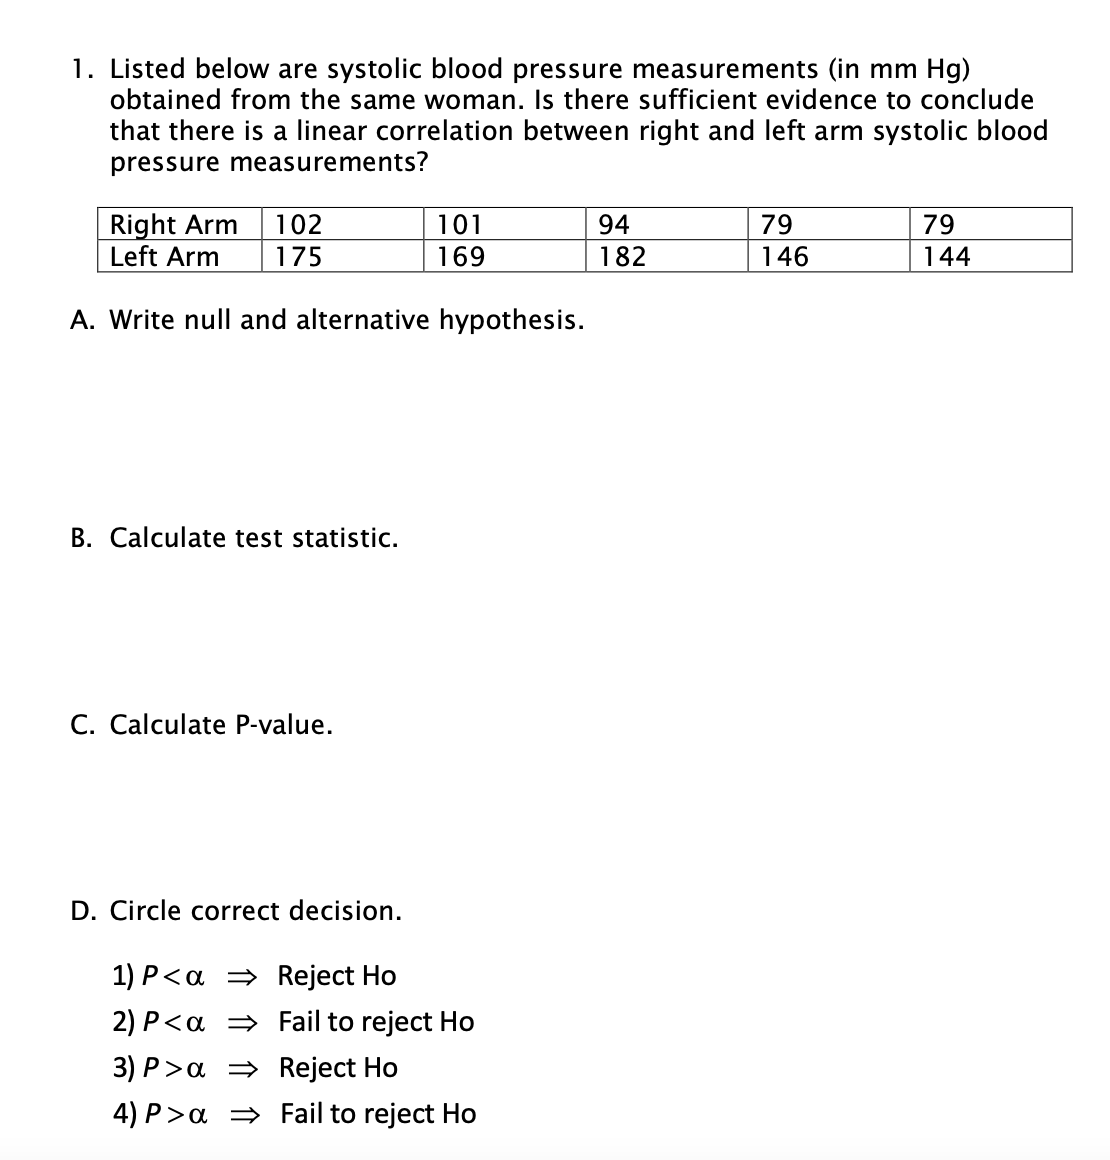 1. Listed below are systolic blood pressure measurements (in mm Hg)
obtained from the same woman. Is there sufficient evidence to conclude
that there is a linear correlation between right and left arm systolic blood
pressure measurements?
Right Arm
Left Arm
101
169
102
94
79
79
175
182
146
144
A. Write null and alternative hypothesis.
B. Calculate test statistic.
C. Calculate P-value.
D. Circle correct decision.
1) P<a = Reject Ho
2) P<a = Fail to reject Ho
3) P>a = Reject Ho
4) P>a = Fail to reject Ho
